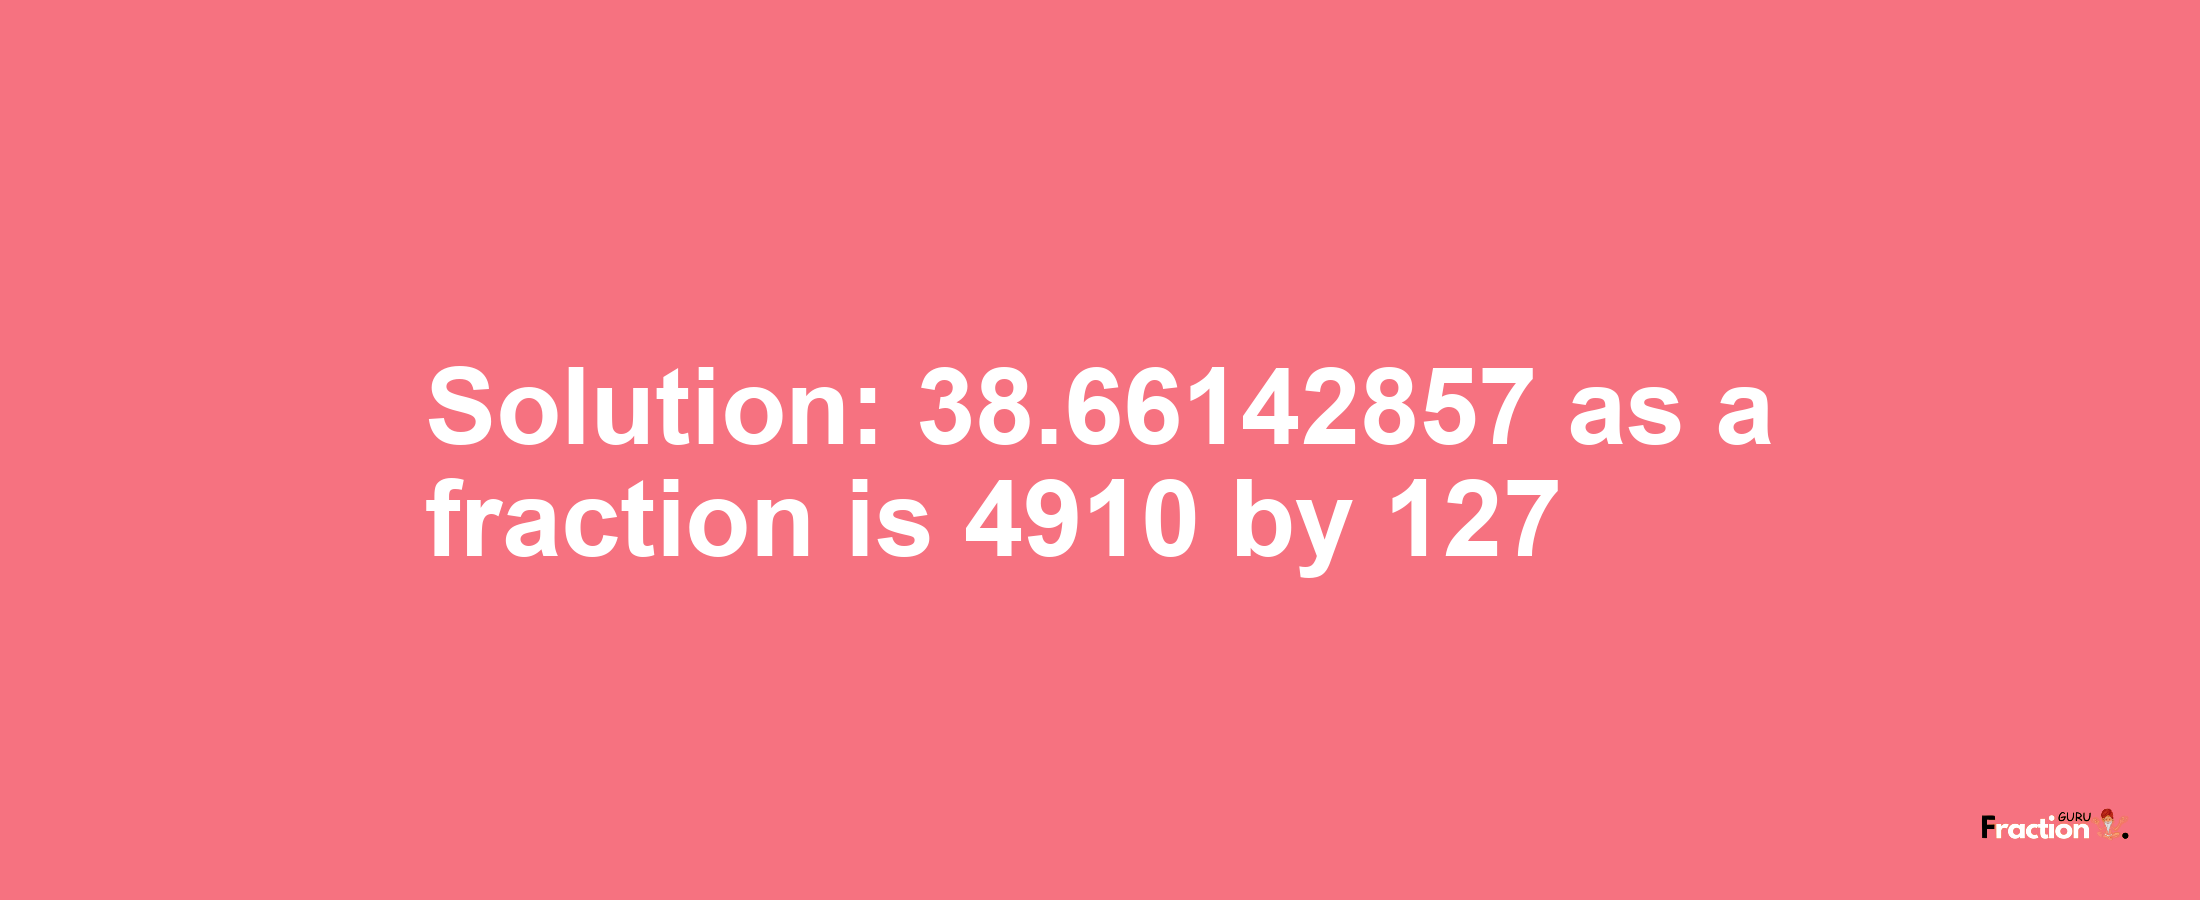 Solution:38.66142857 as a fraction is 4910/127